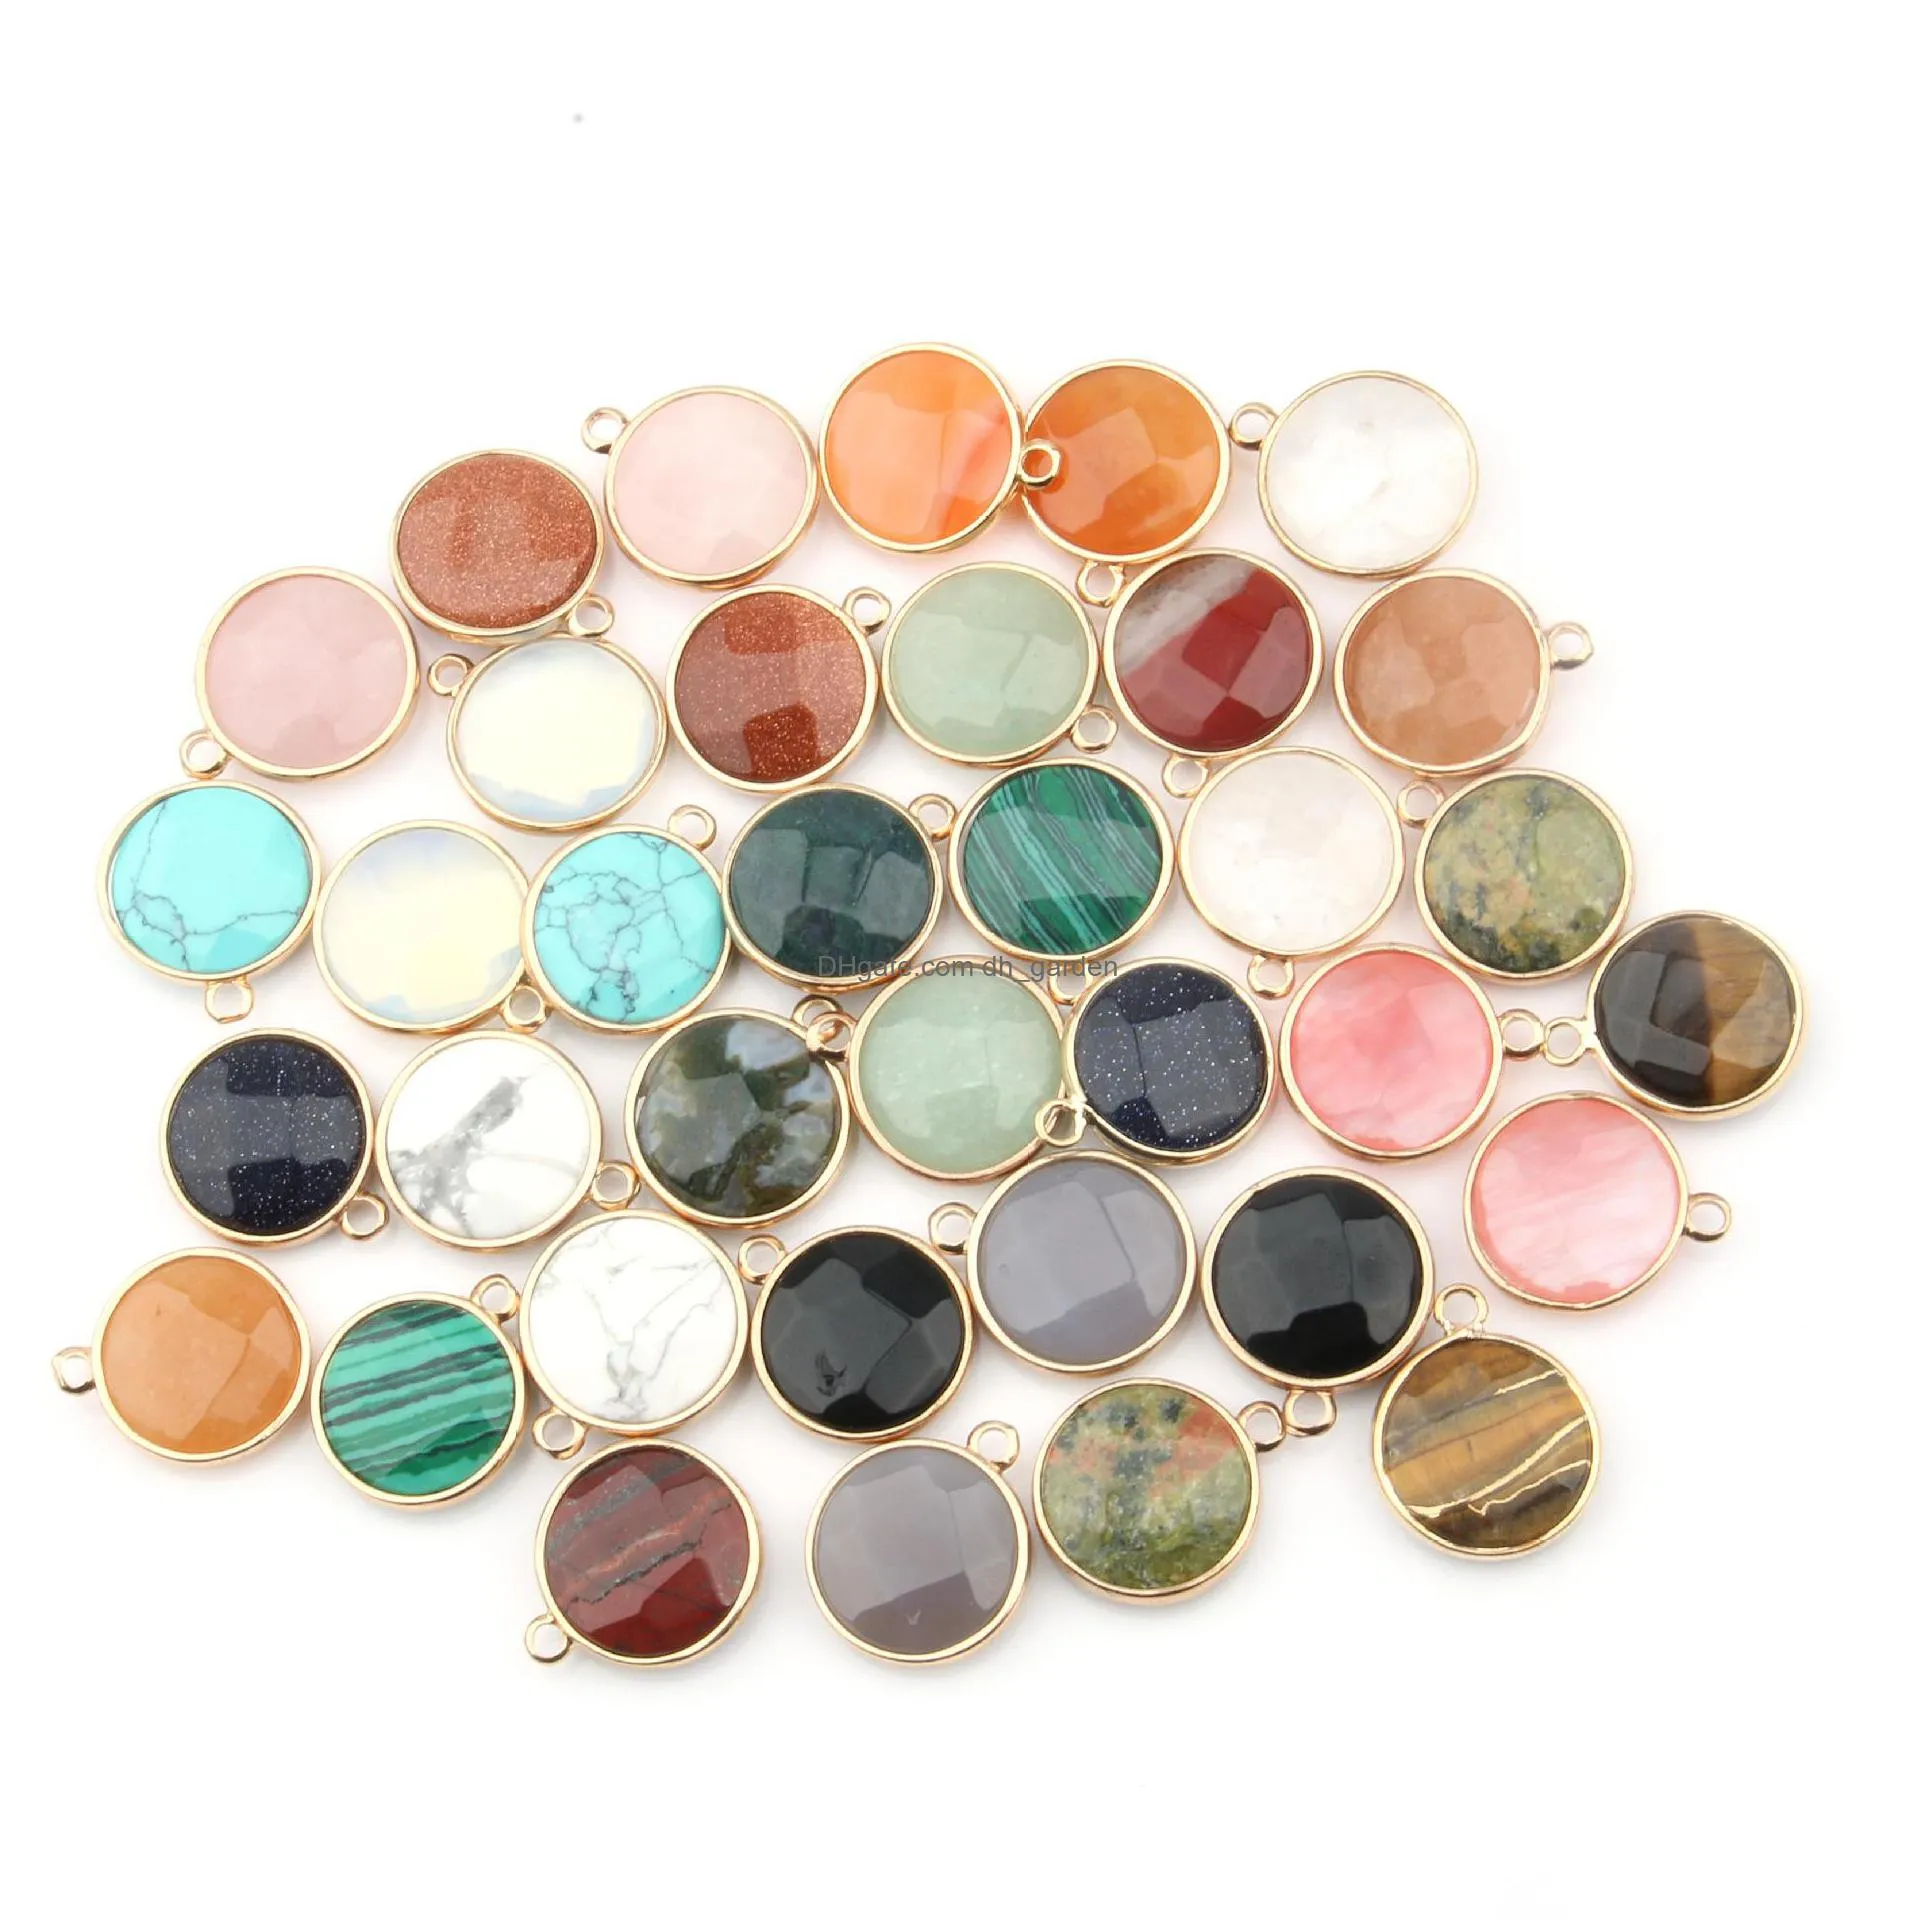 faceted round shape natural stone charms healing agates crystal turquoises jades opal stones pendant for jewelry making necklace bracelet